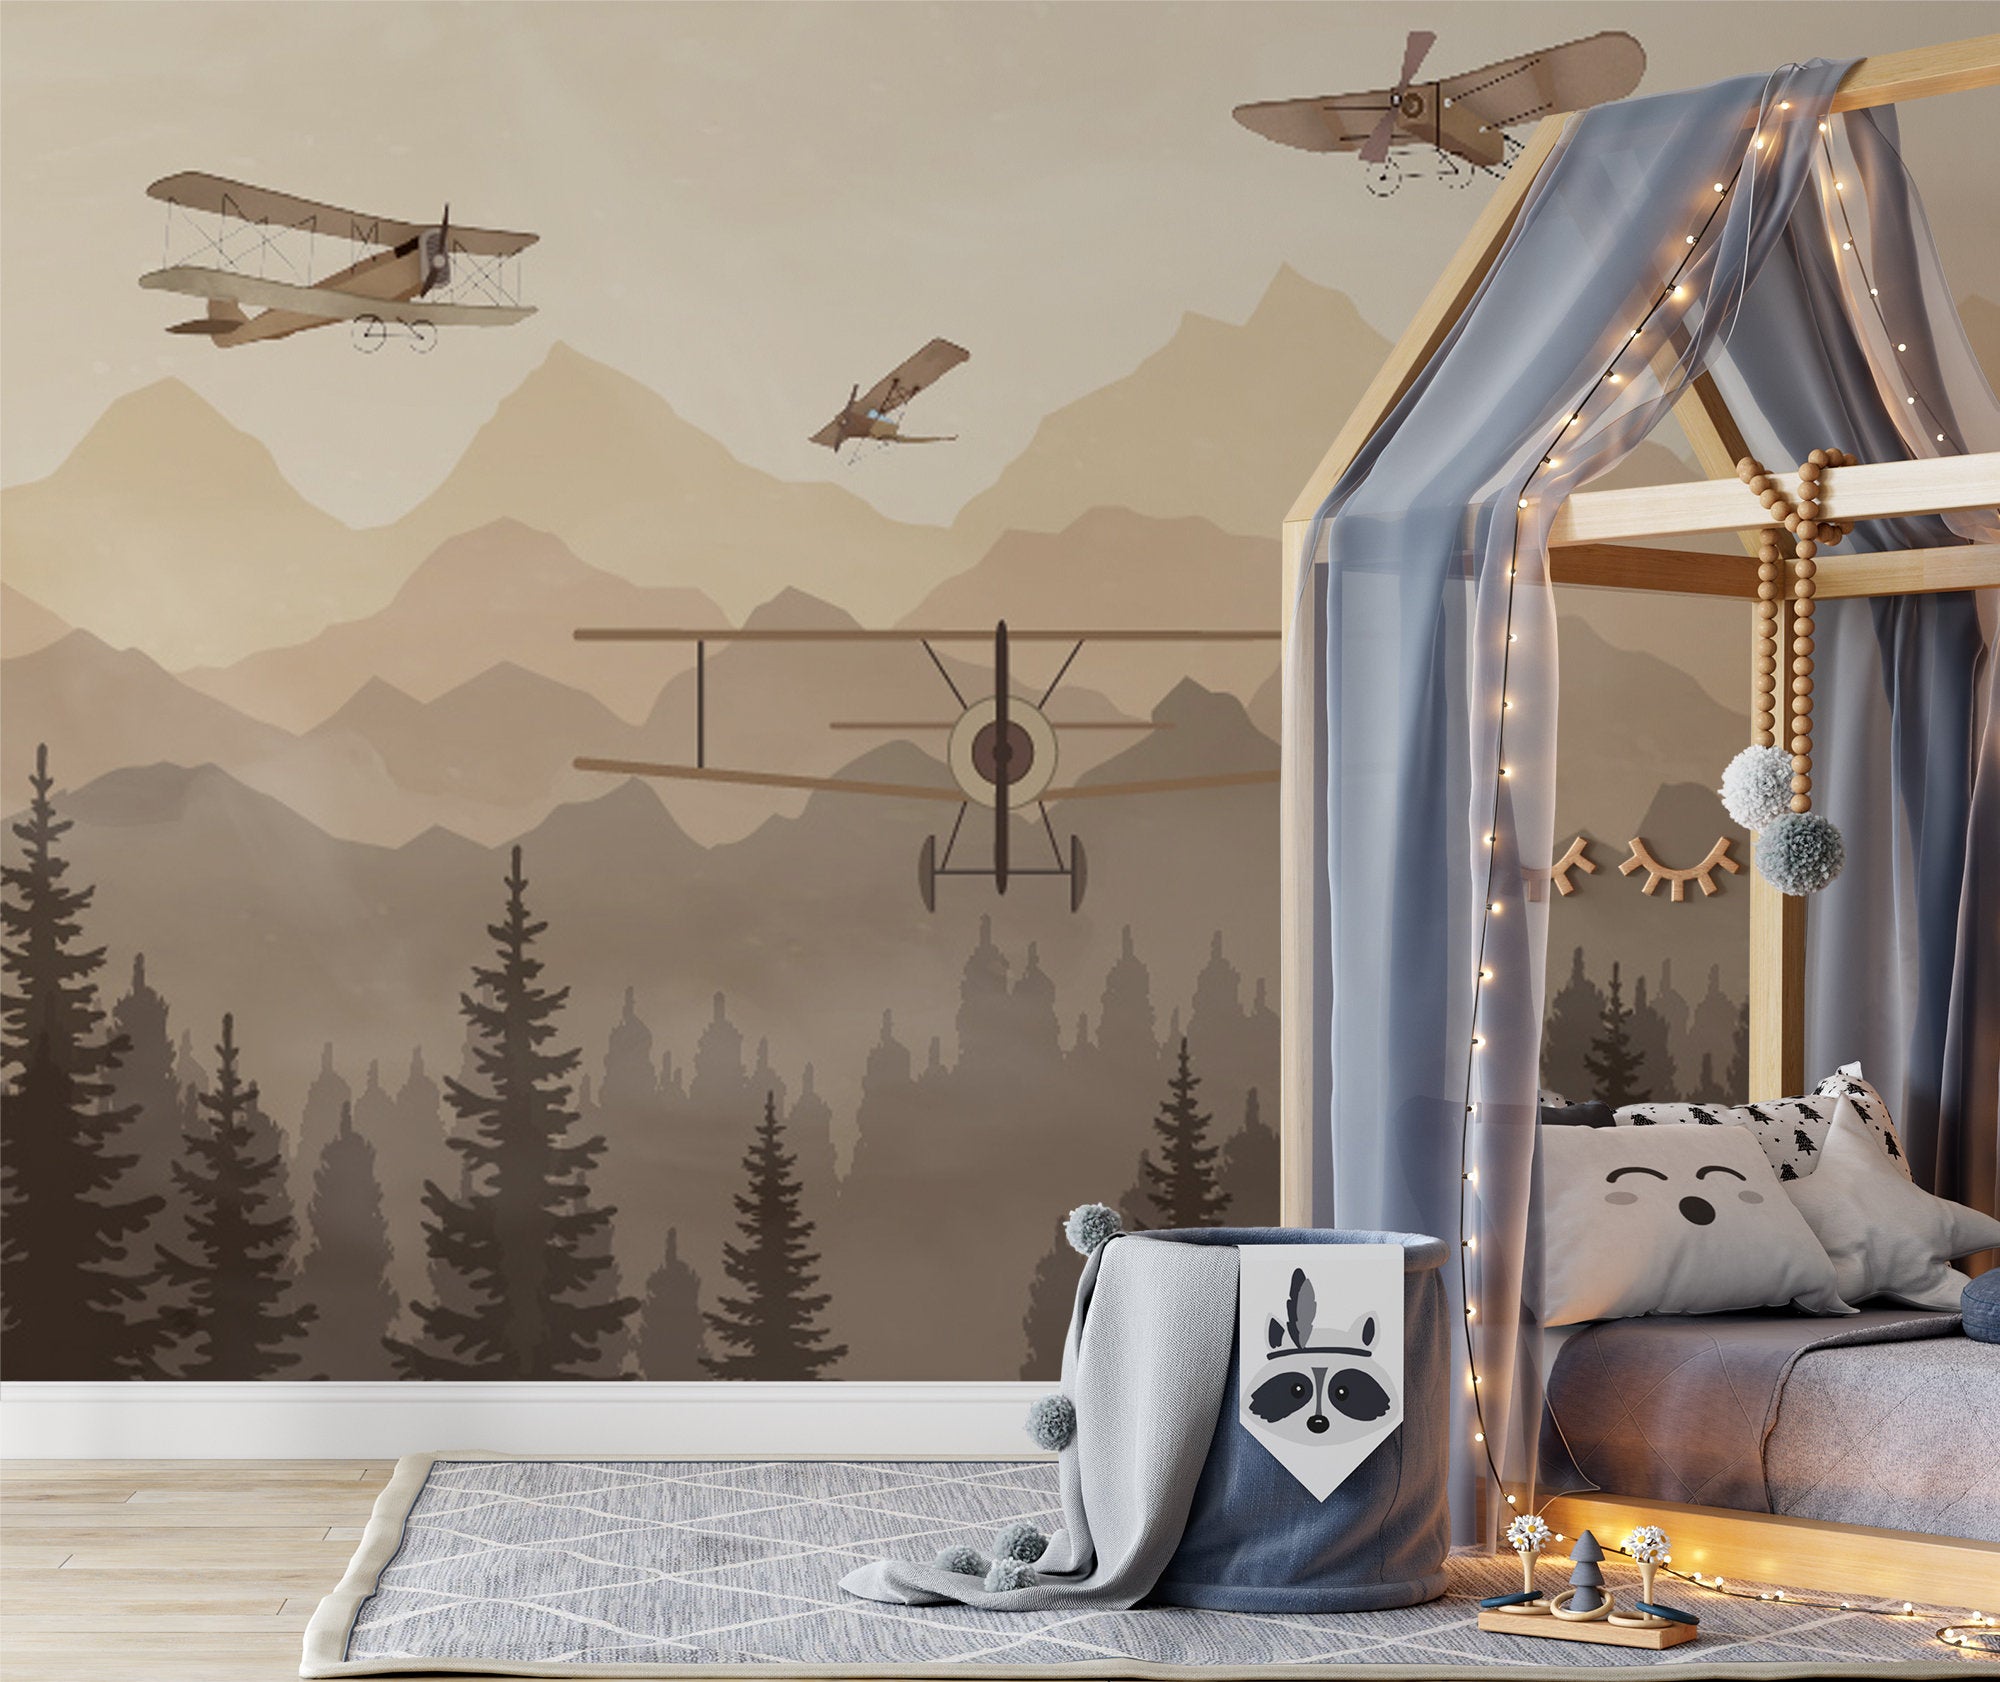 Vintage Airplanes Foggy Forest Row a Mountains Wallpaper Self Adhesive Peel and Stick Wall Sticker Wall Decoration Removable